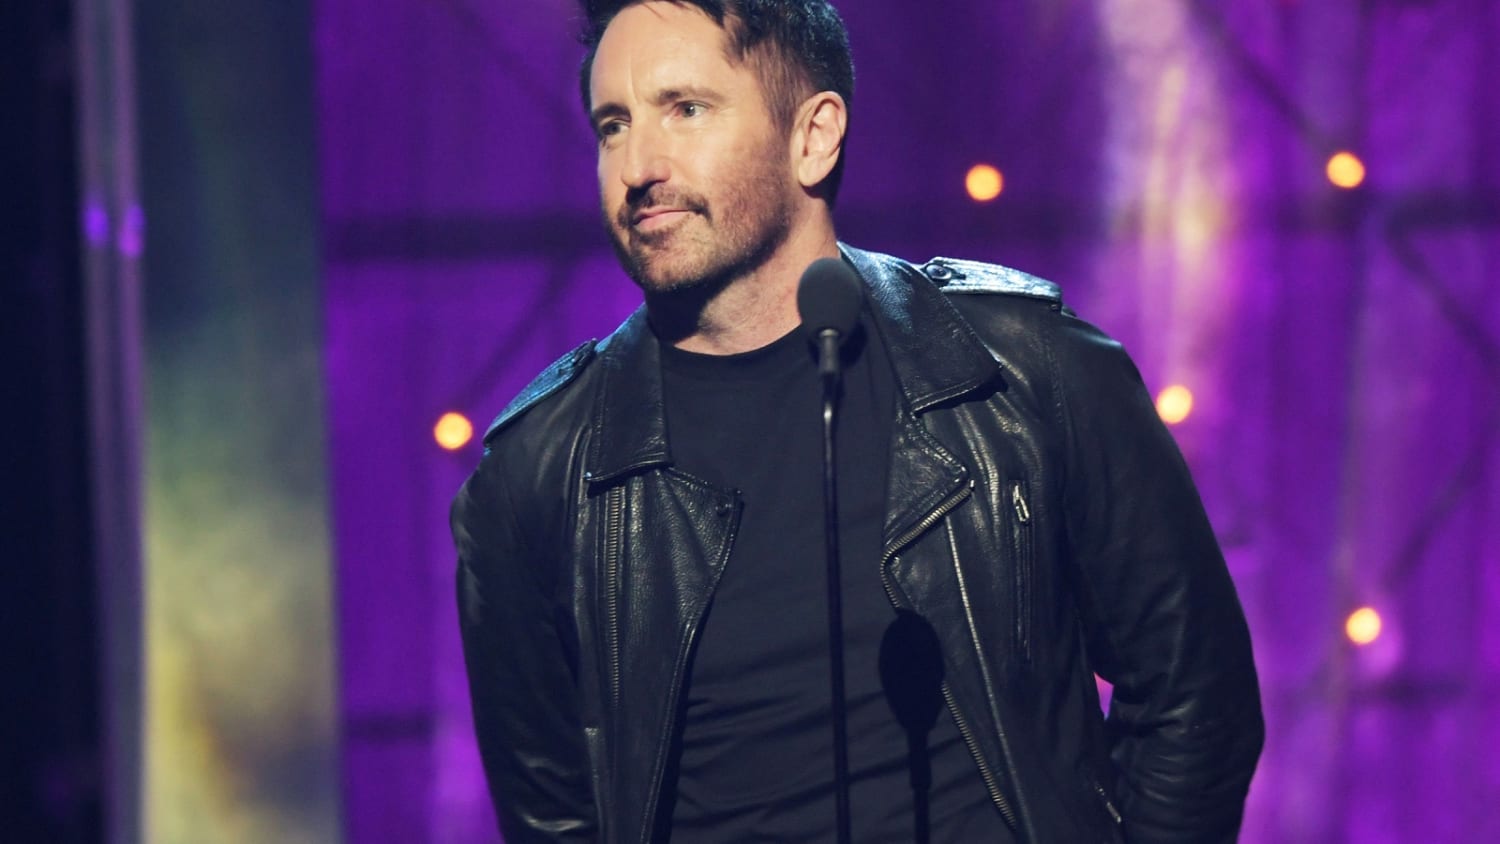 Hear Trent Reznor React to His Rock & Roll Hall of Fame Induction